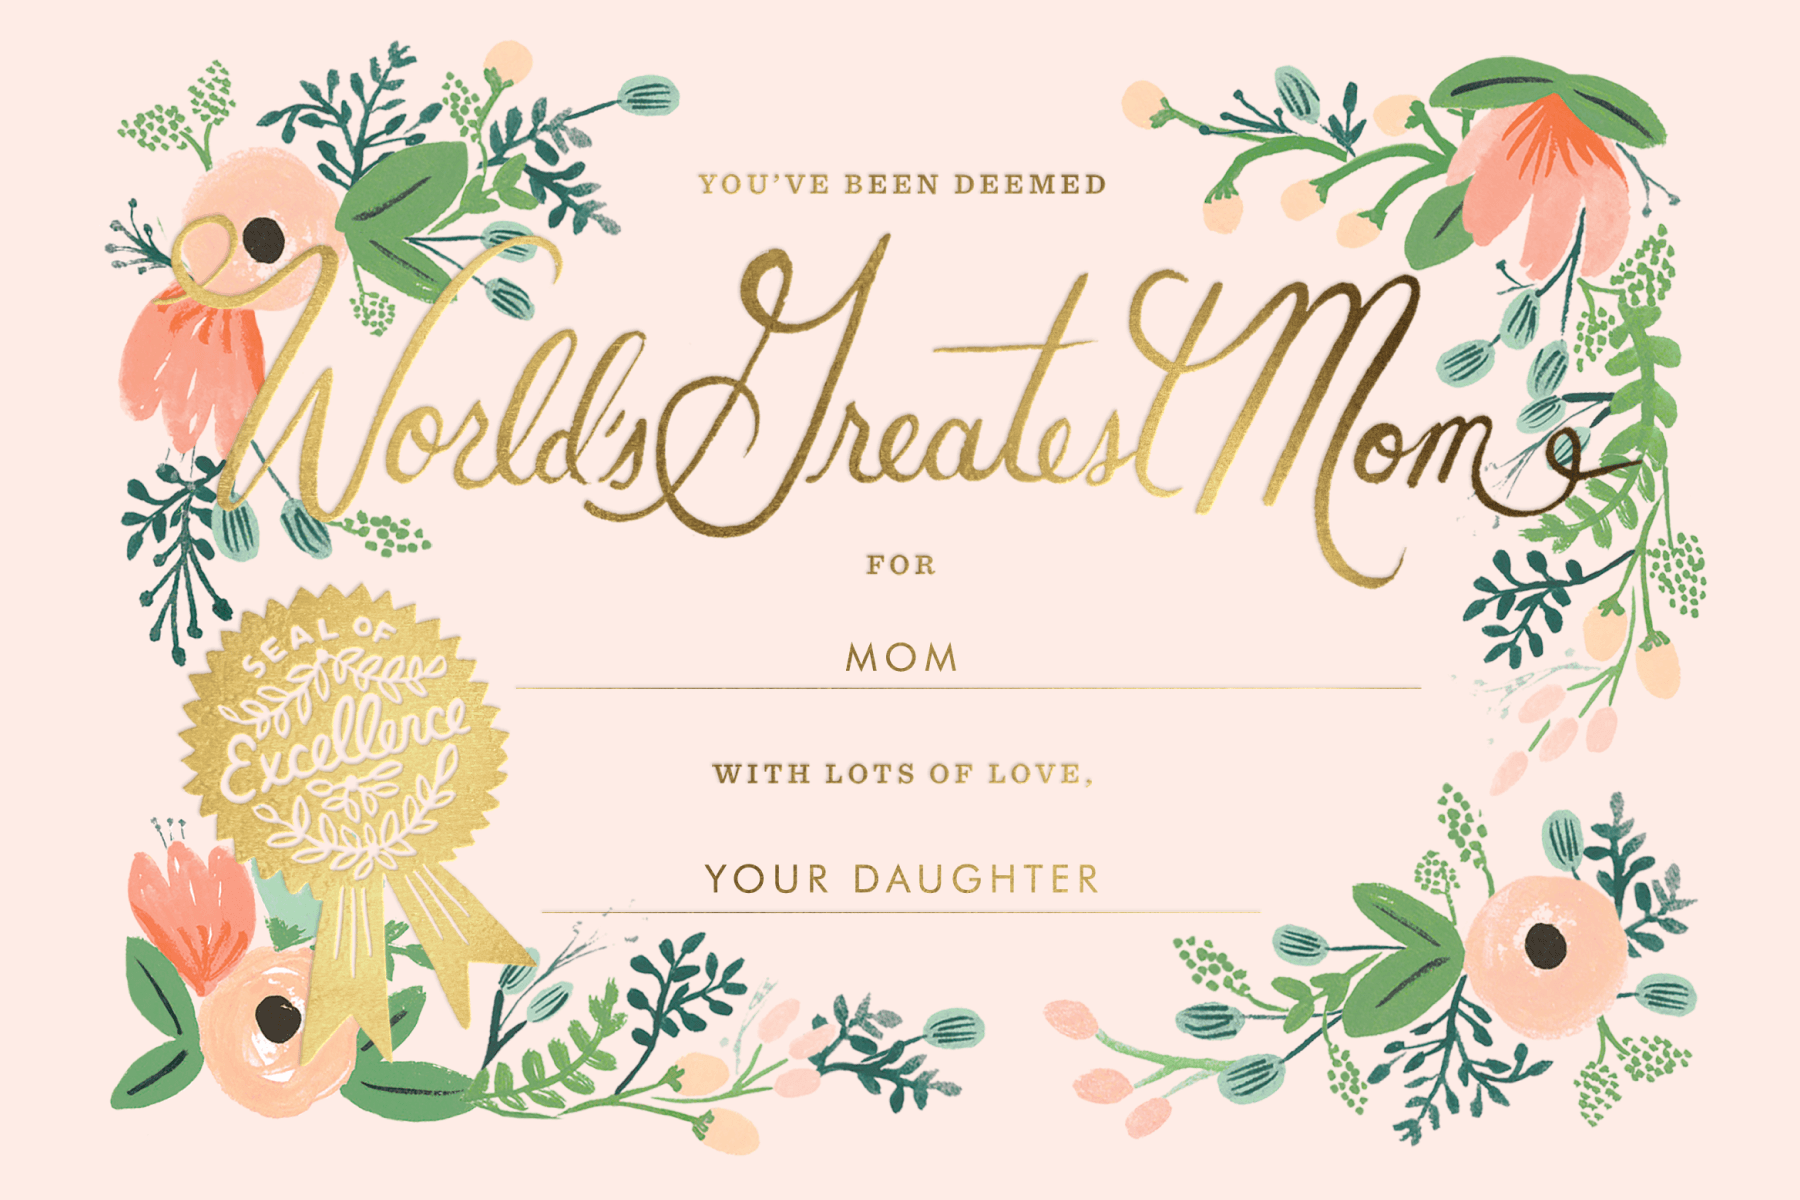 A pink floral certificate for the world’s greatest mom.